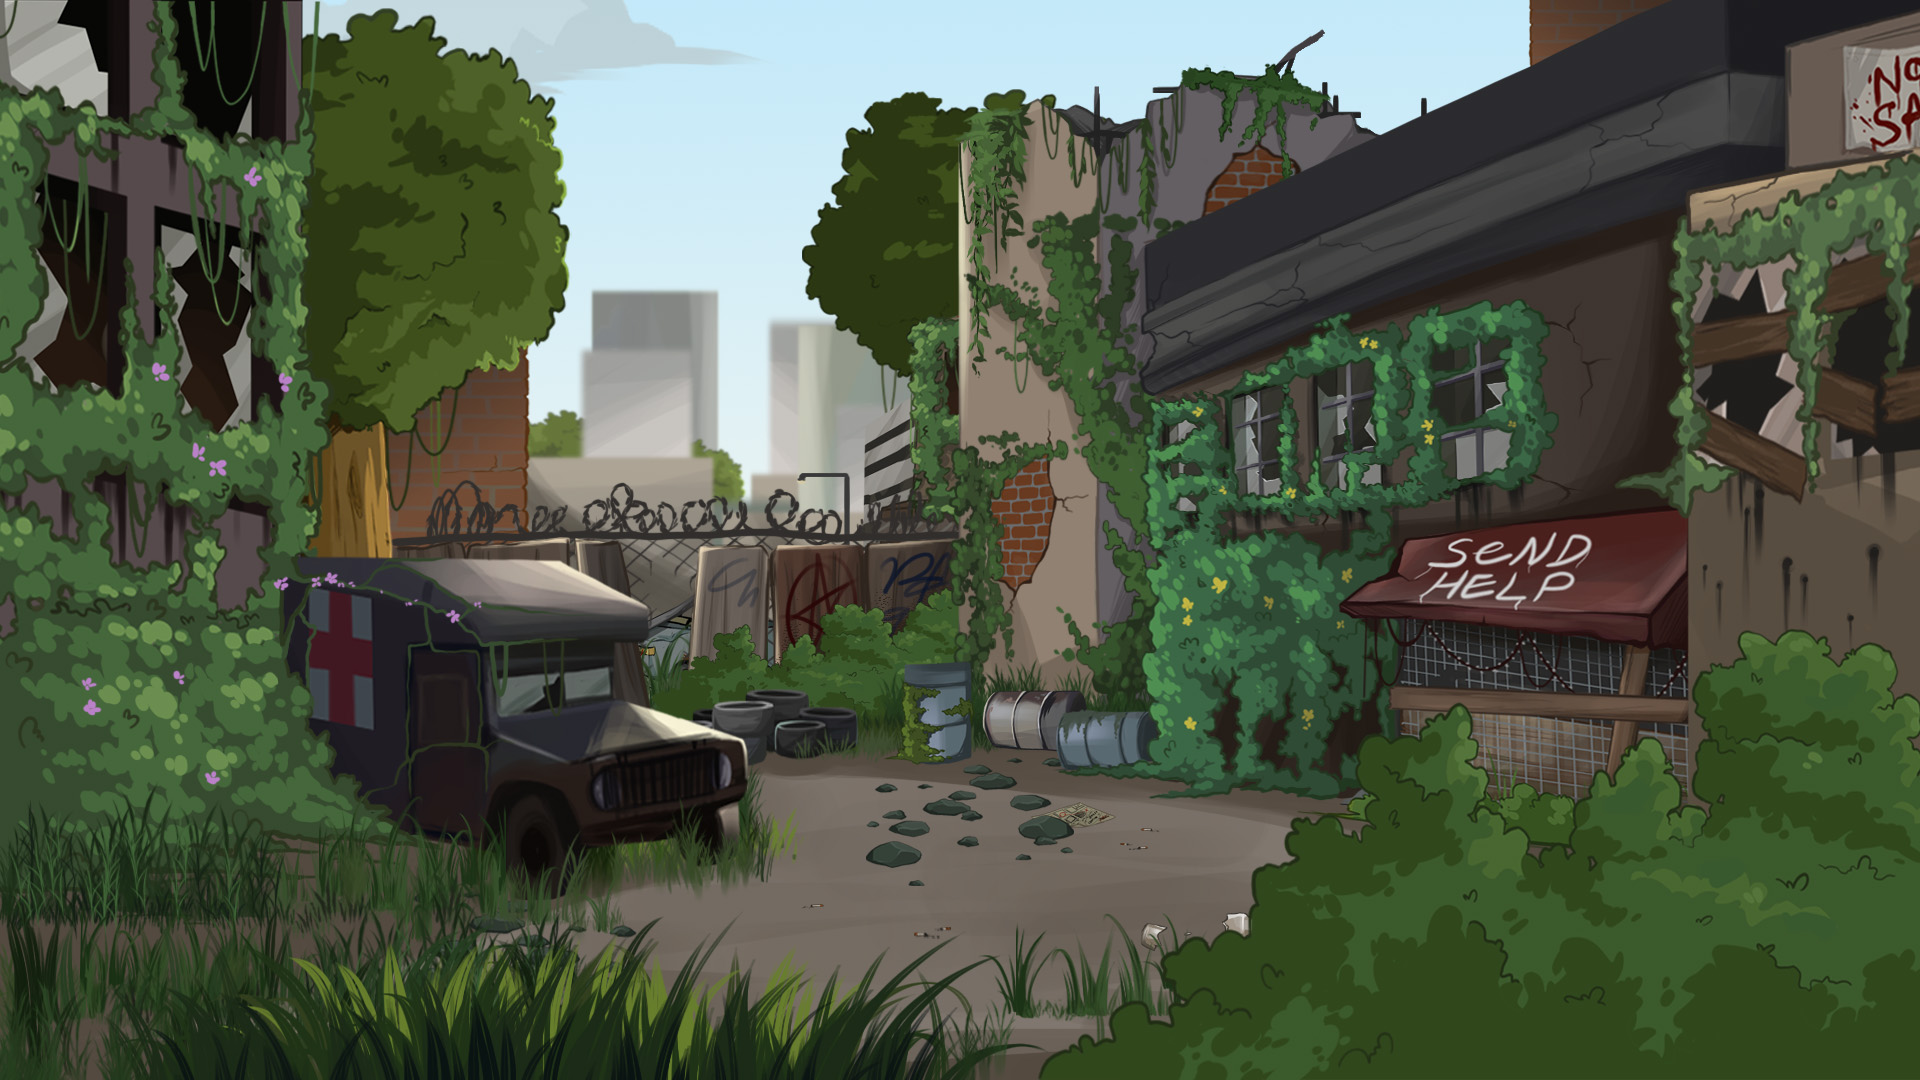 A detailed background by Sophie Gates showing an abandoned city with lots of overgrown plants.